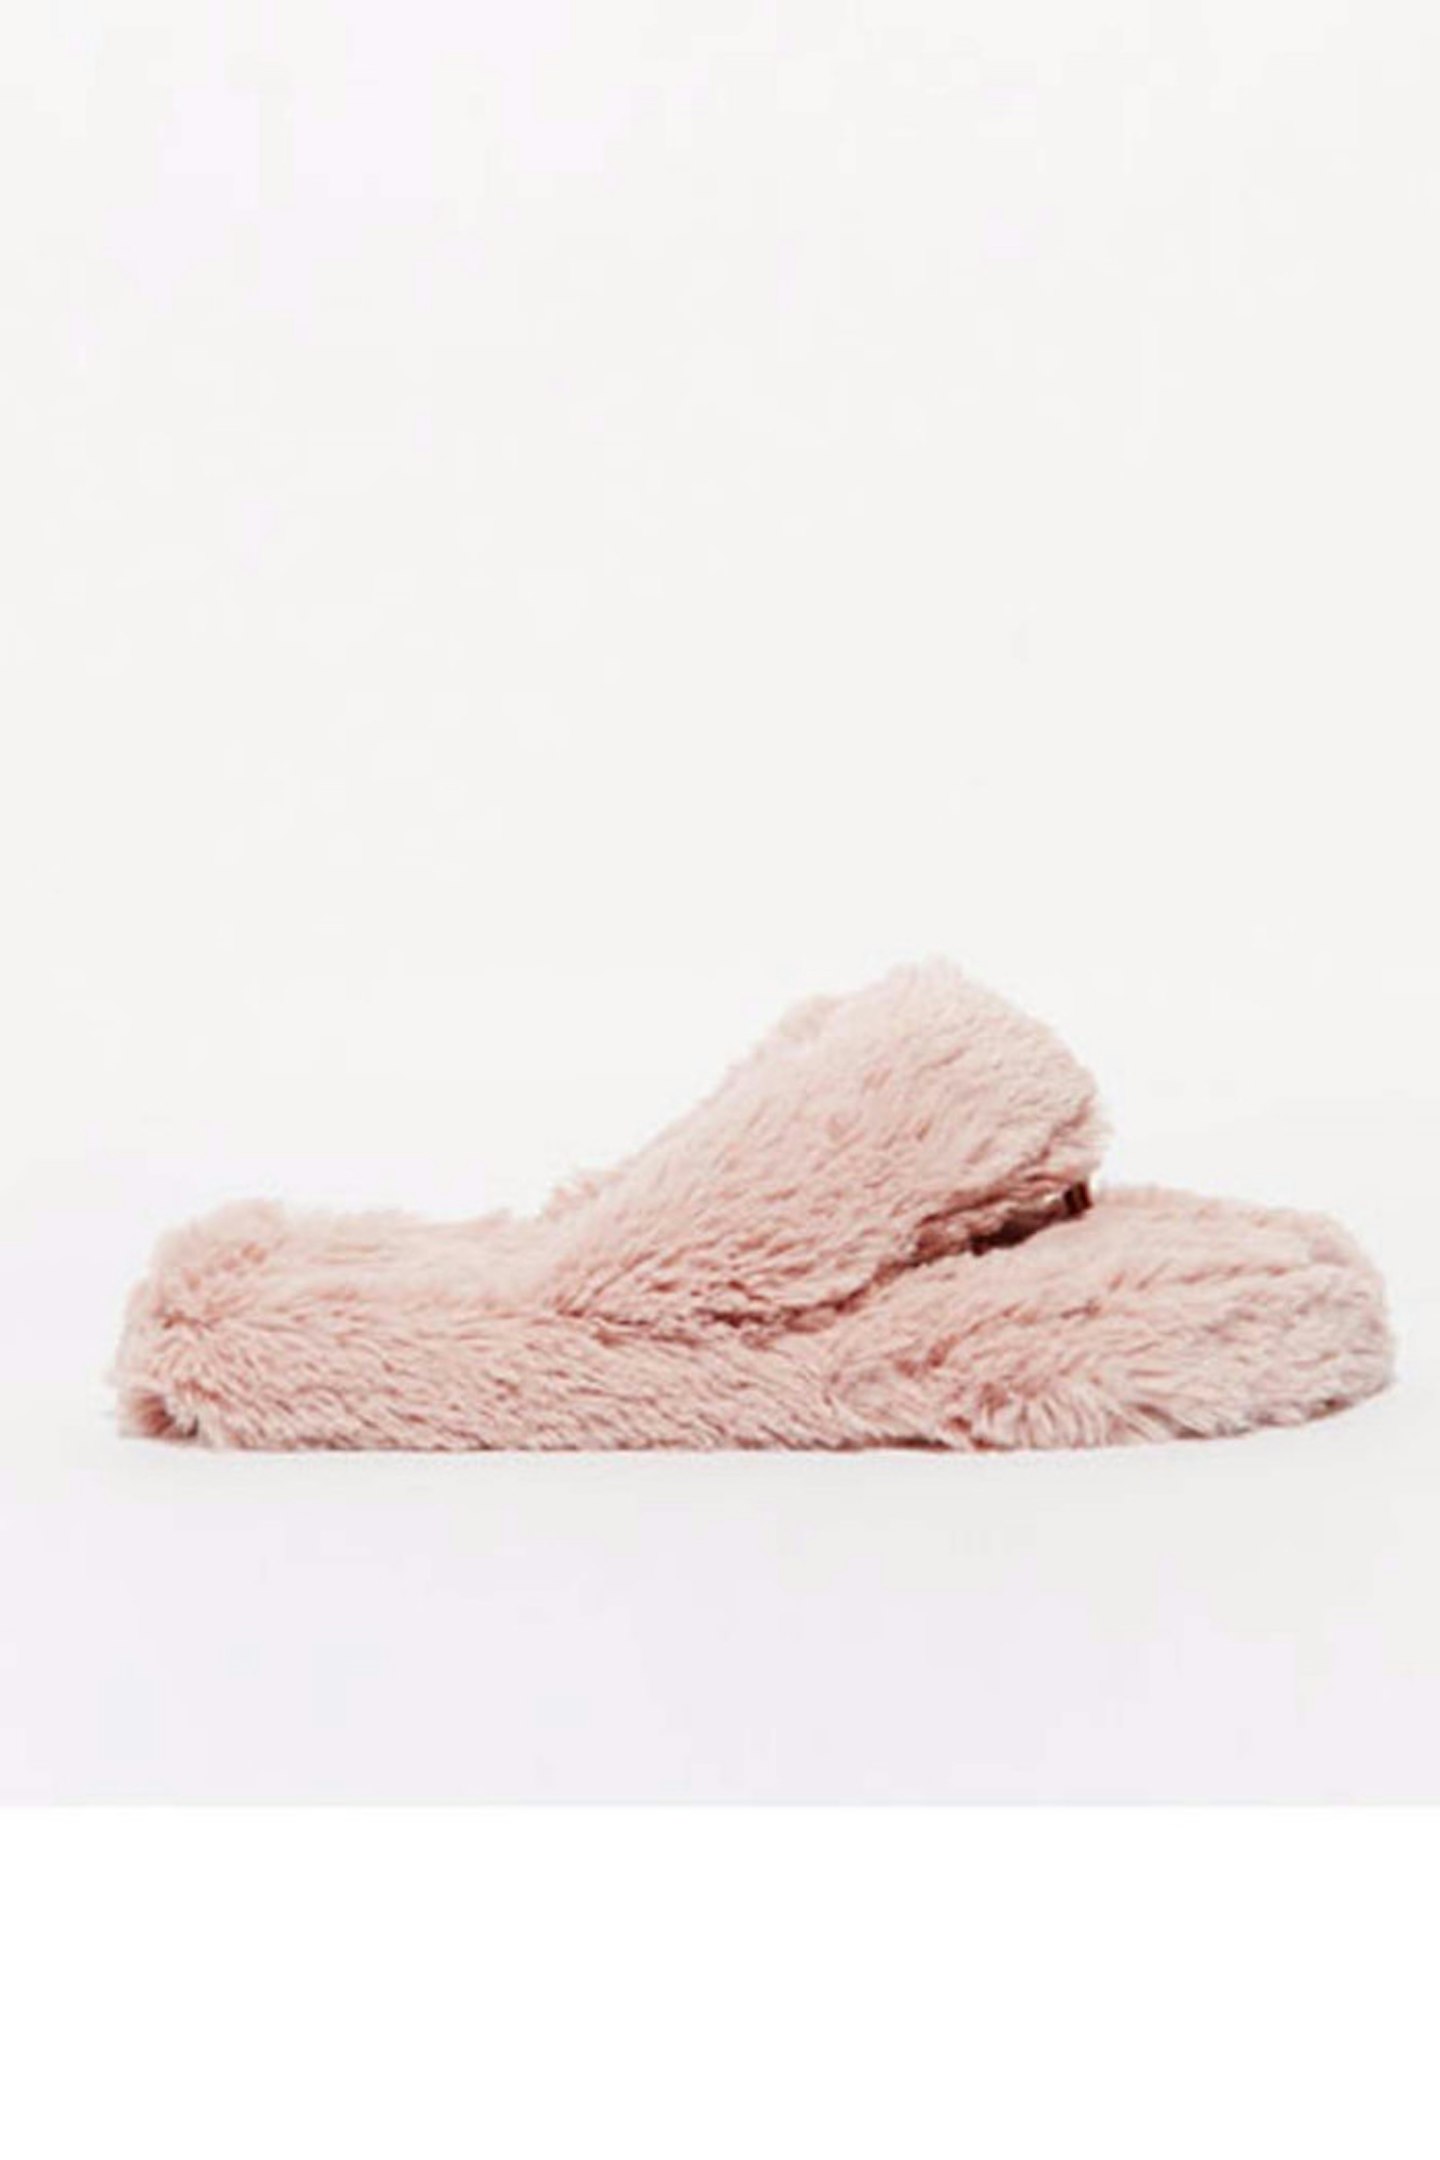 Slippers, £7.99, New look at ASOS